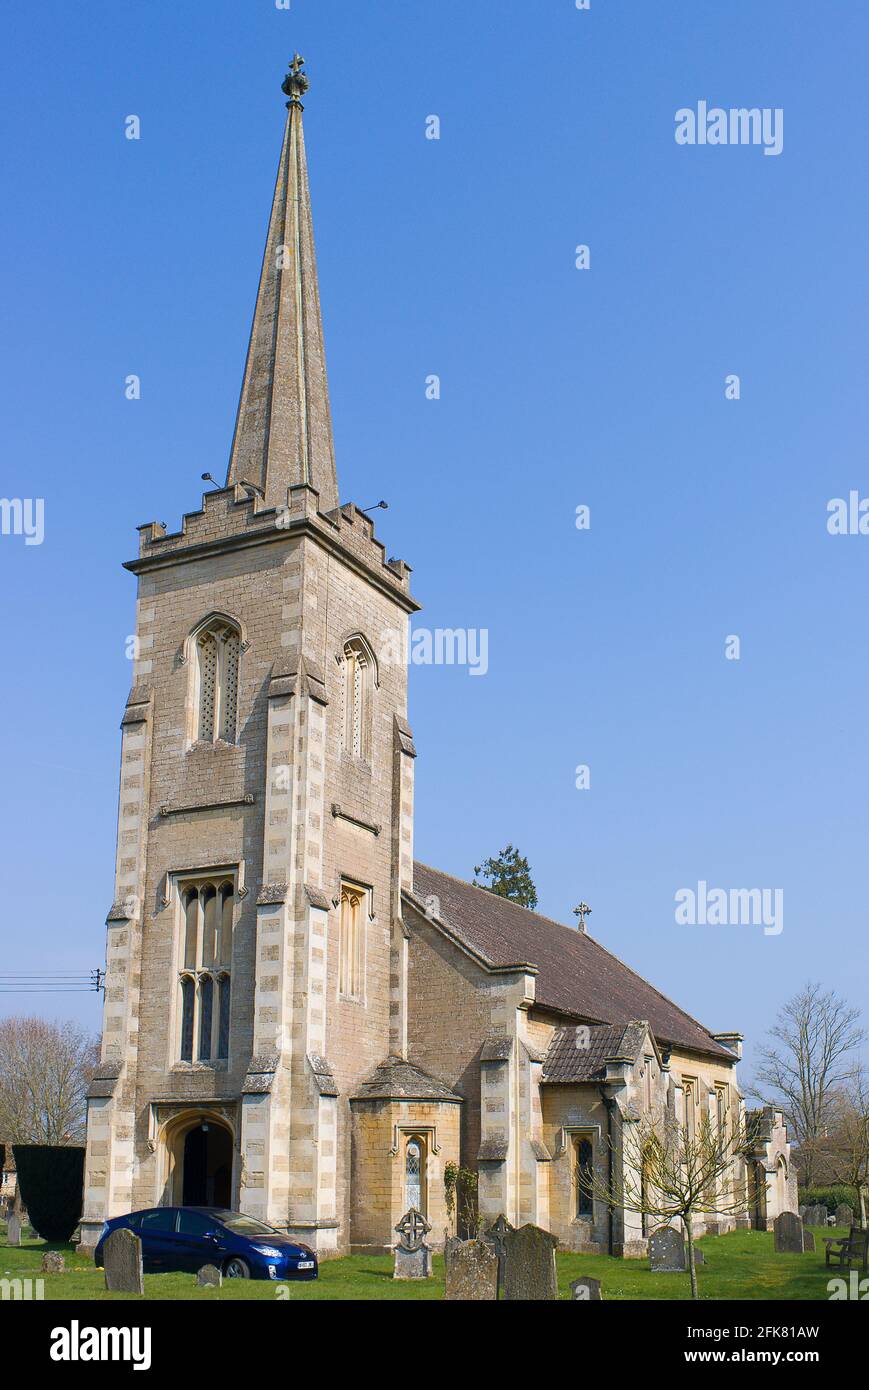 A combined tower and spire characterize this Anglican Christ Church in Derry Hill Wiltshire England UK Stock Photo